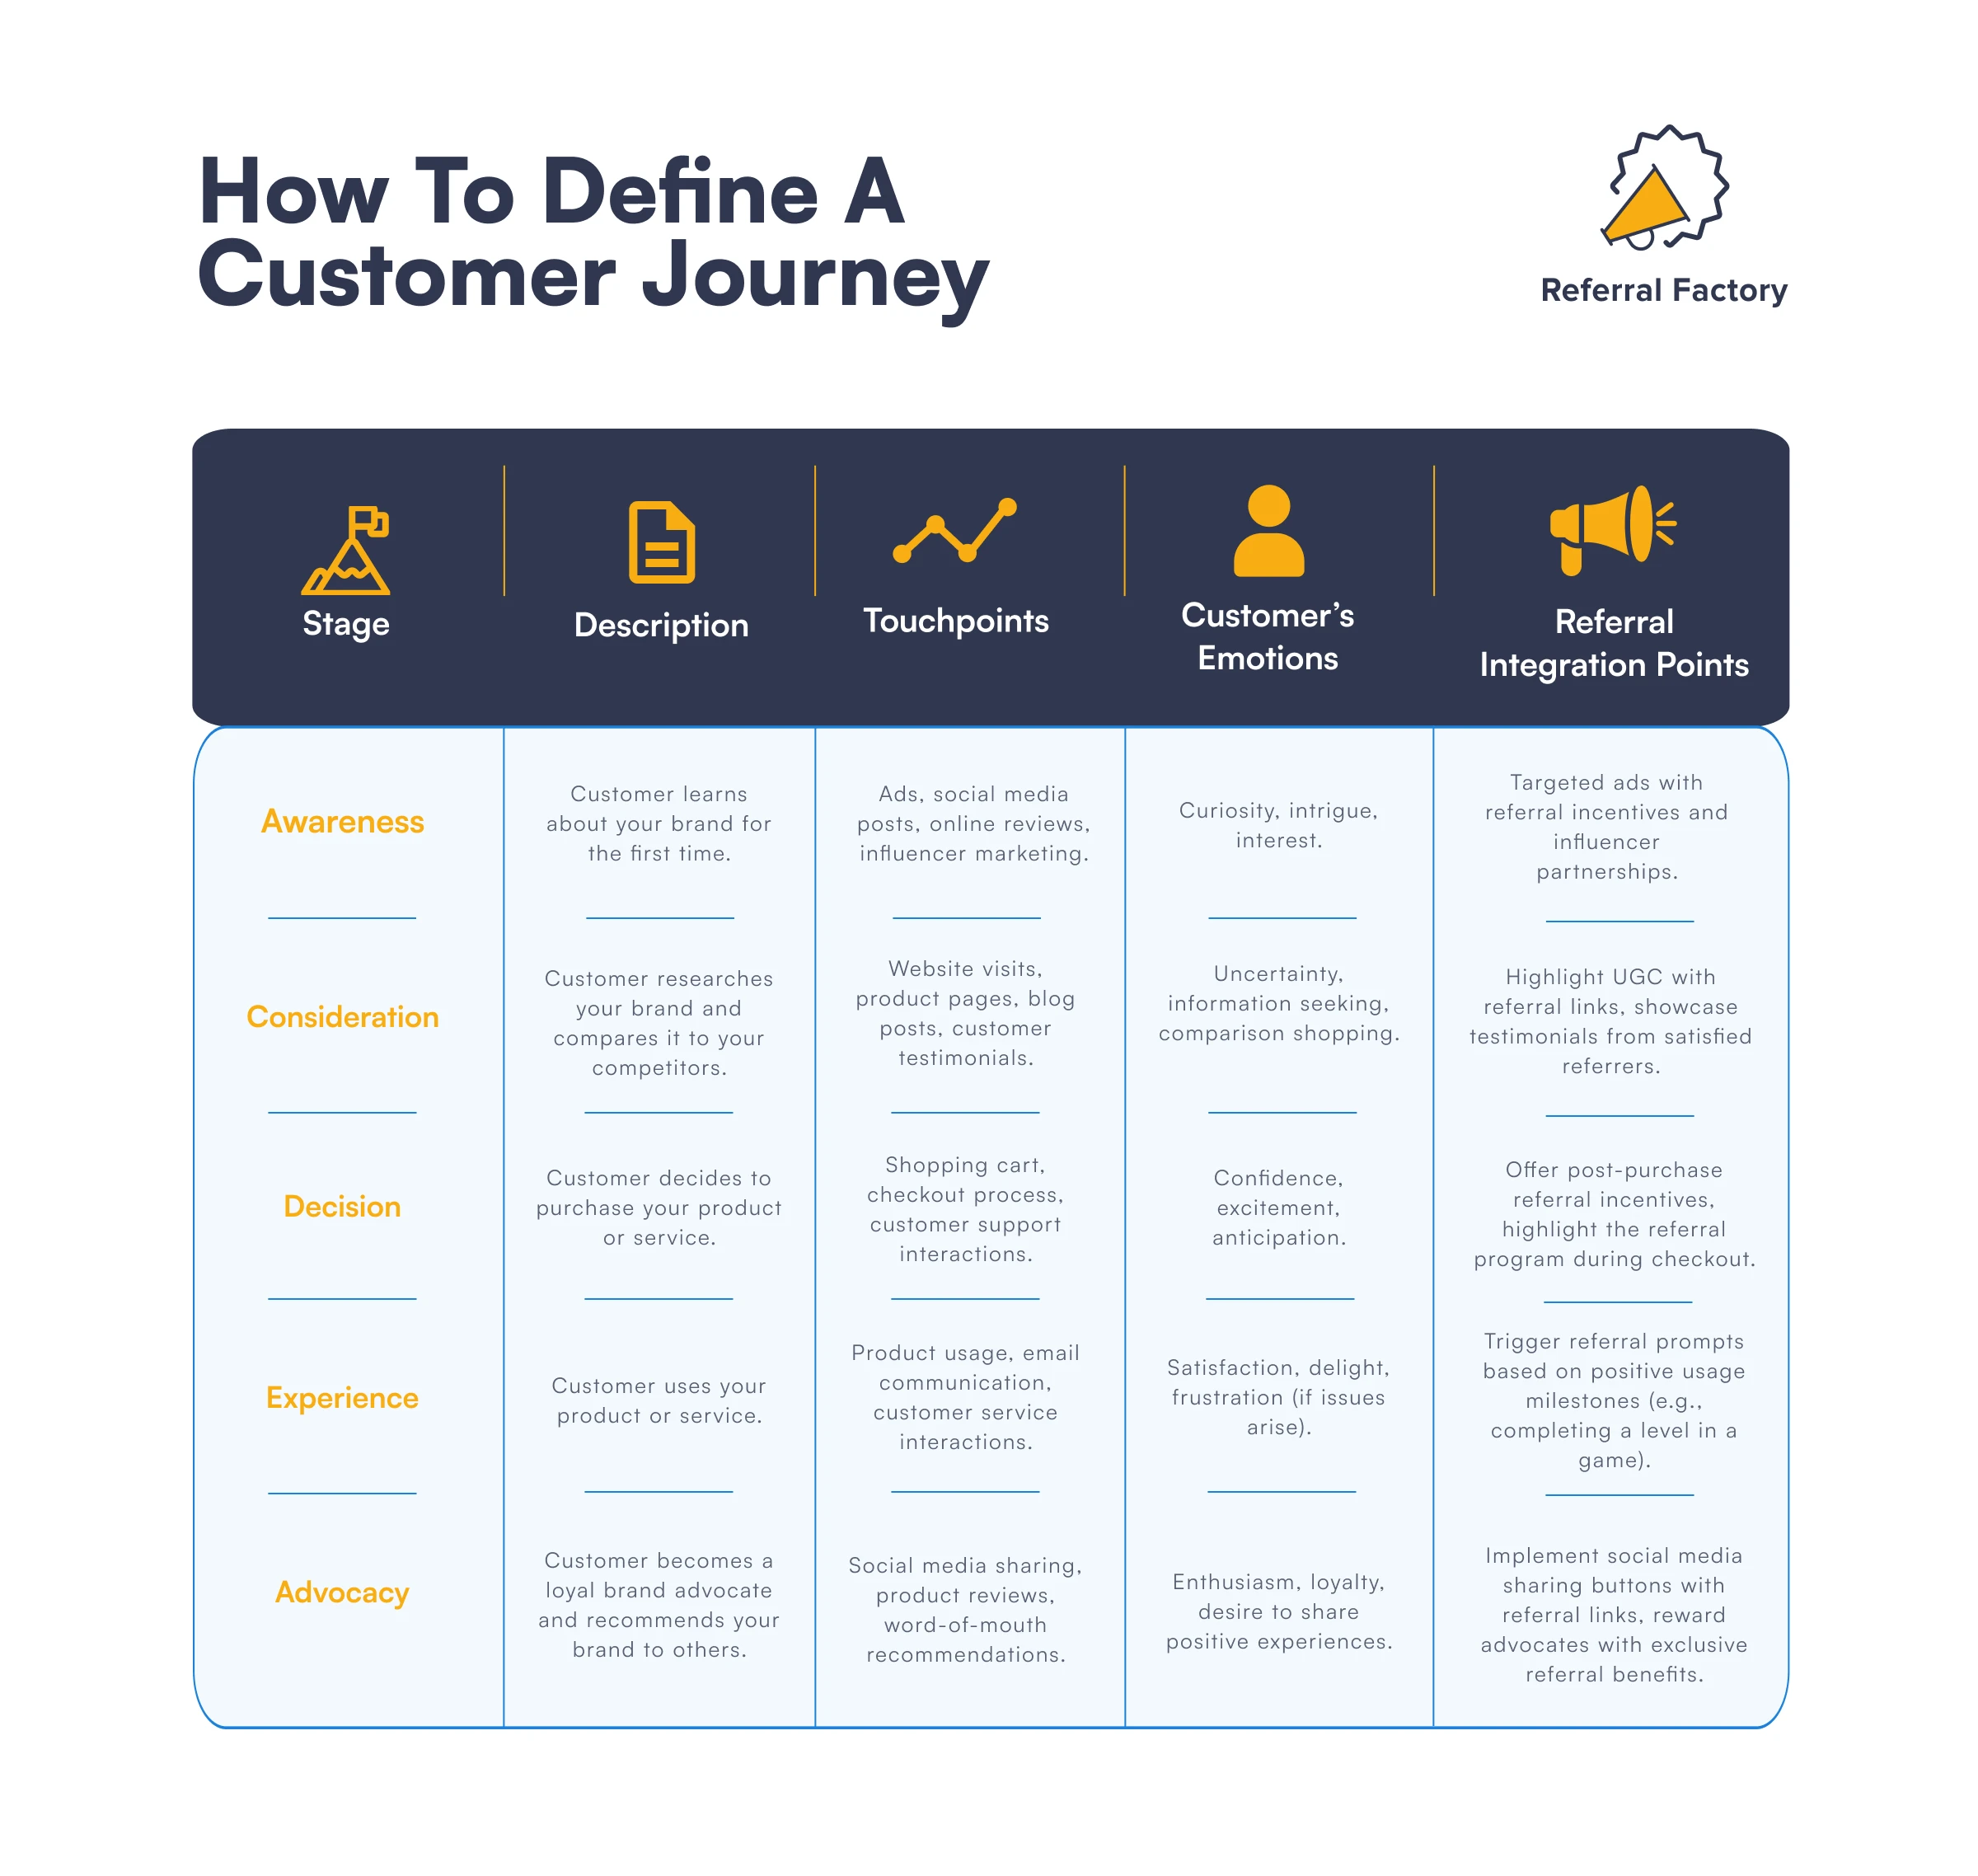 how to define a customer journey and integrate referral marketing best practices along the journey referral marketing infographic